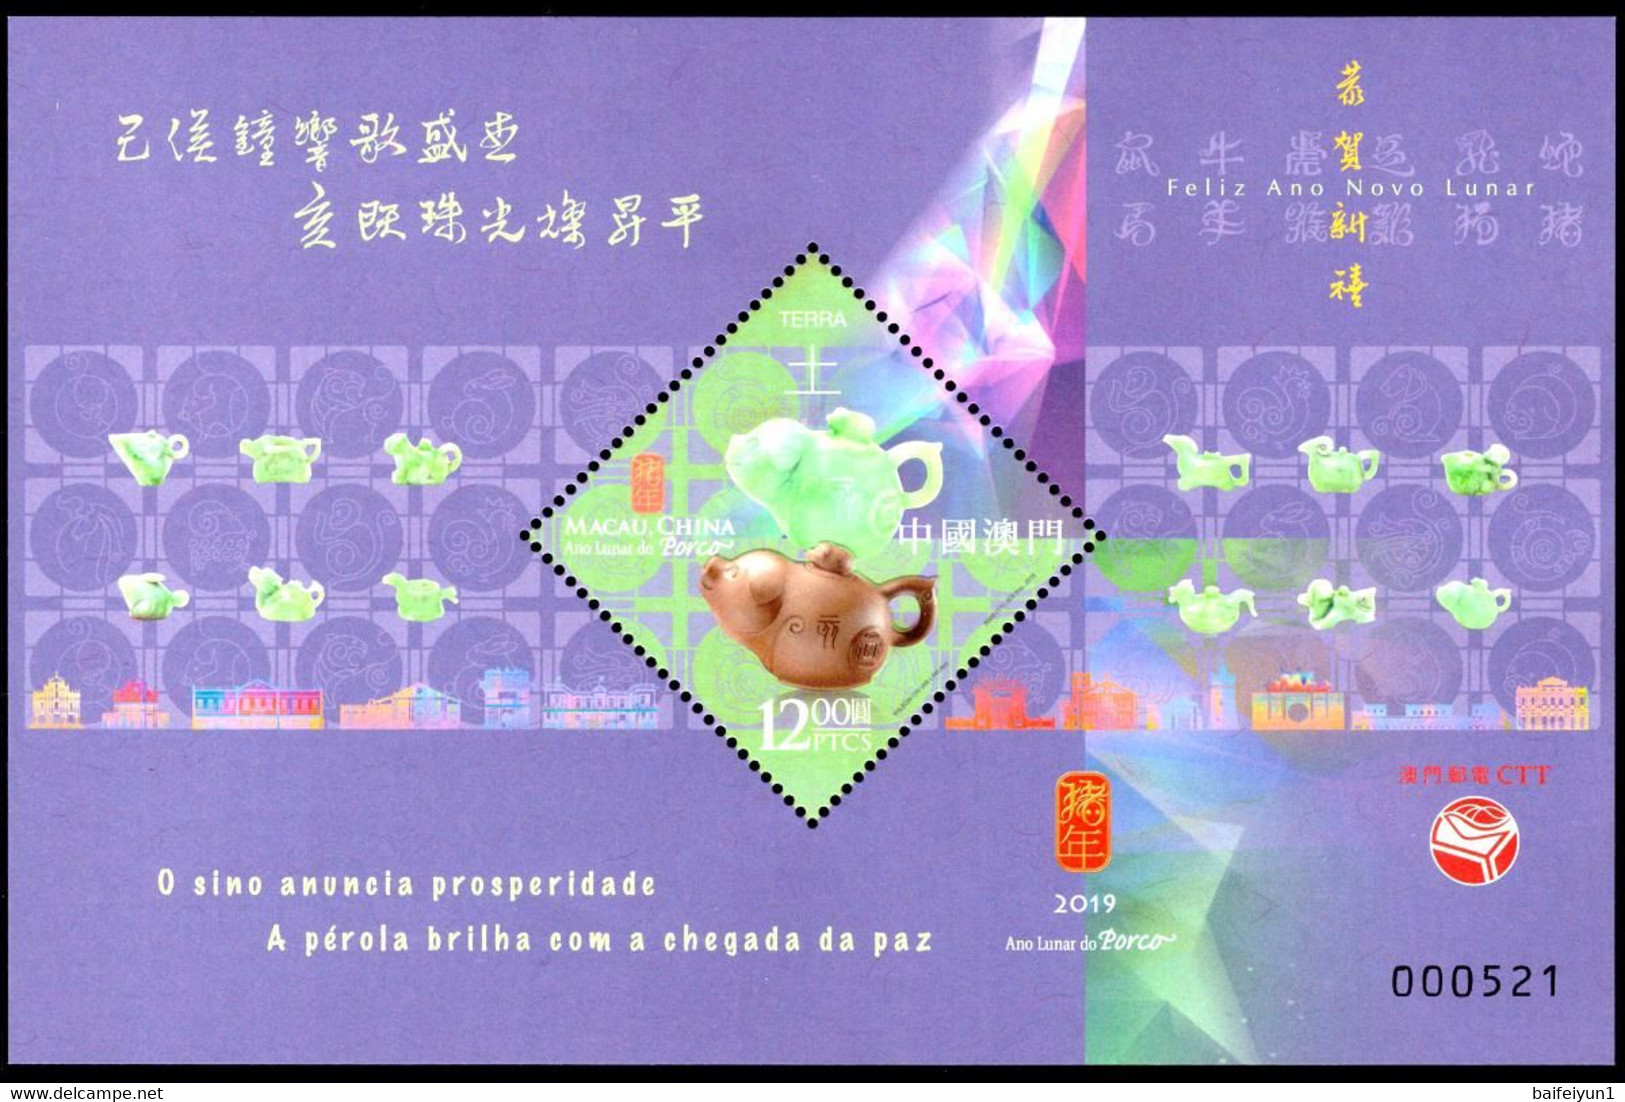 Macau 2019 China New Year Zodiac Of Pig Stamps 5v+ S/S Hologram - Hologrammes